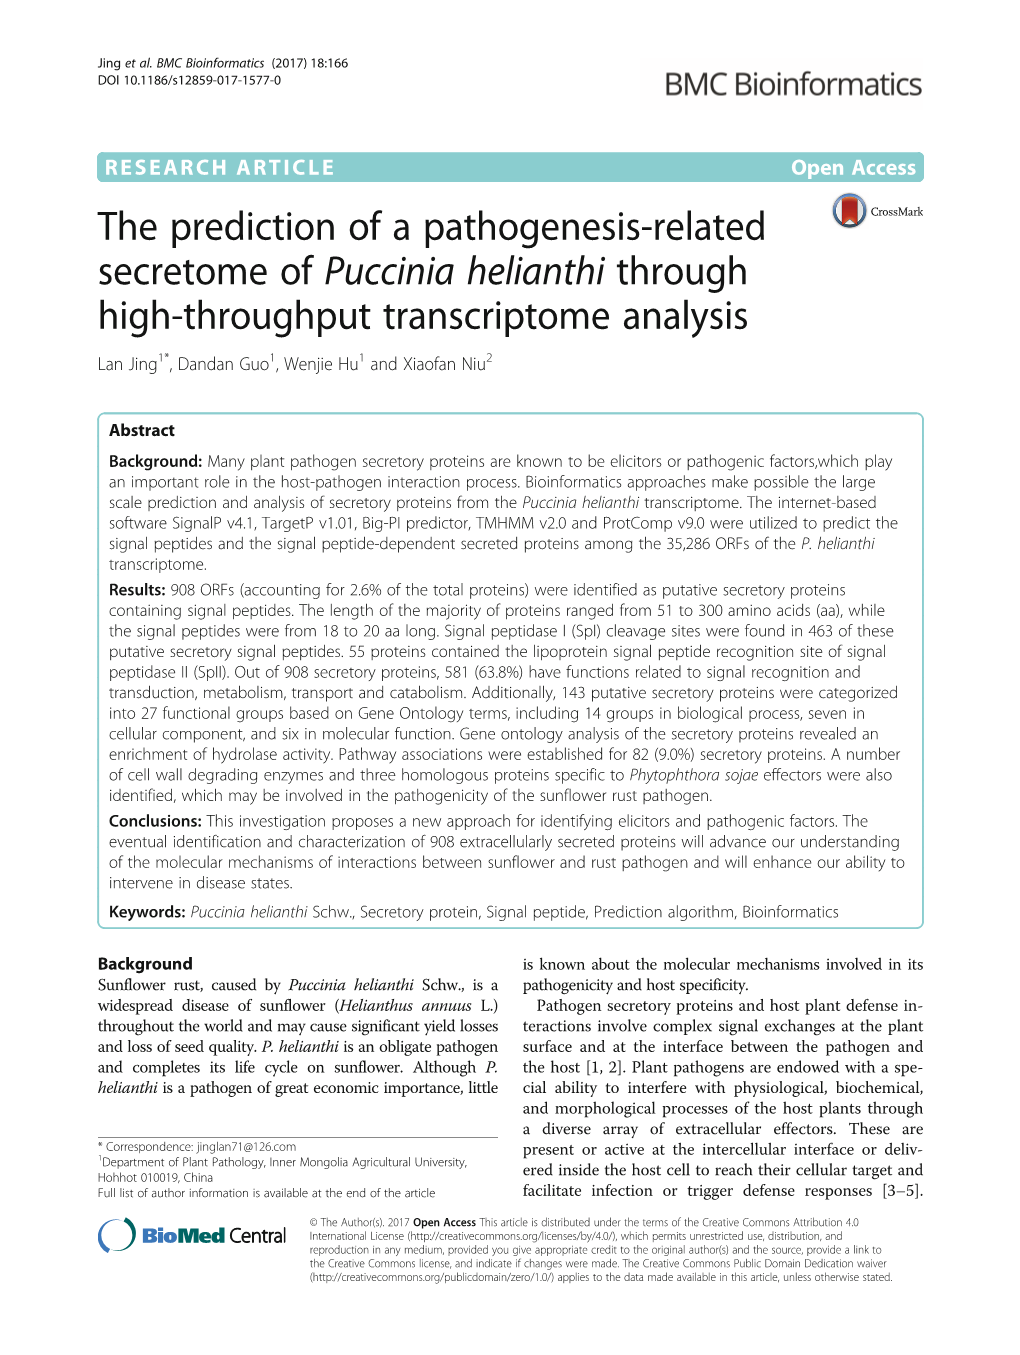 The Prediction of a Pathogenesis-Related Secretome Of